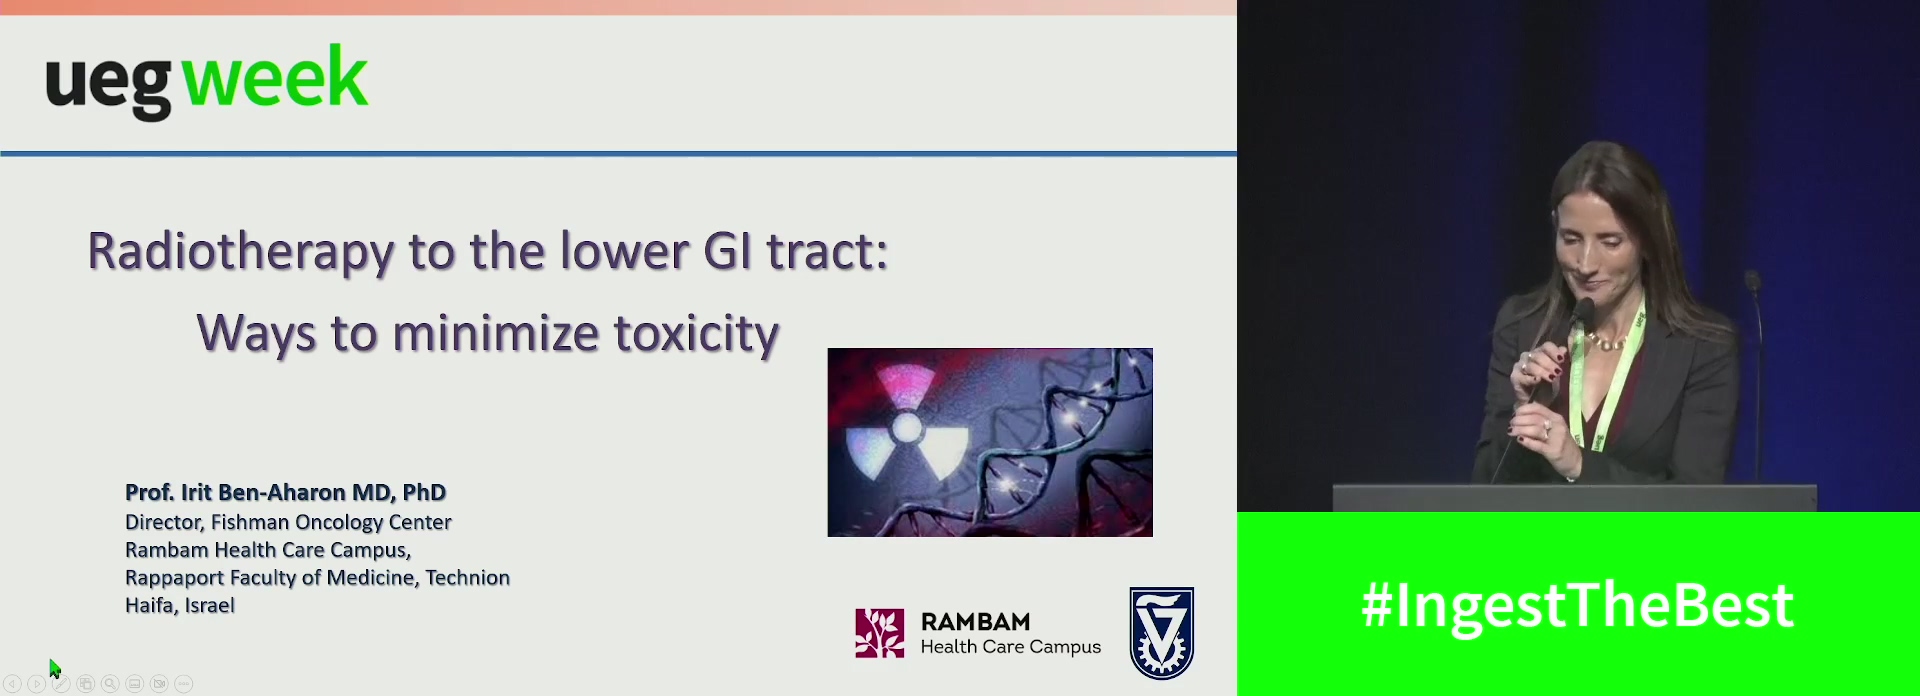 Radiotherapy of the lower GI tract: Ways to minimise toxicity